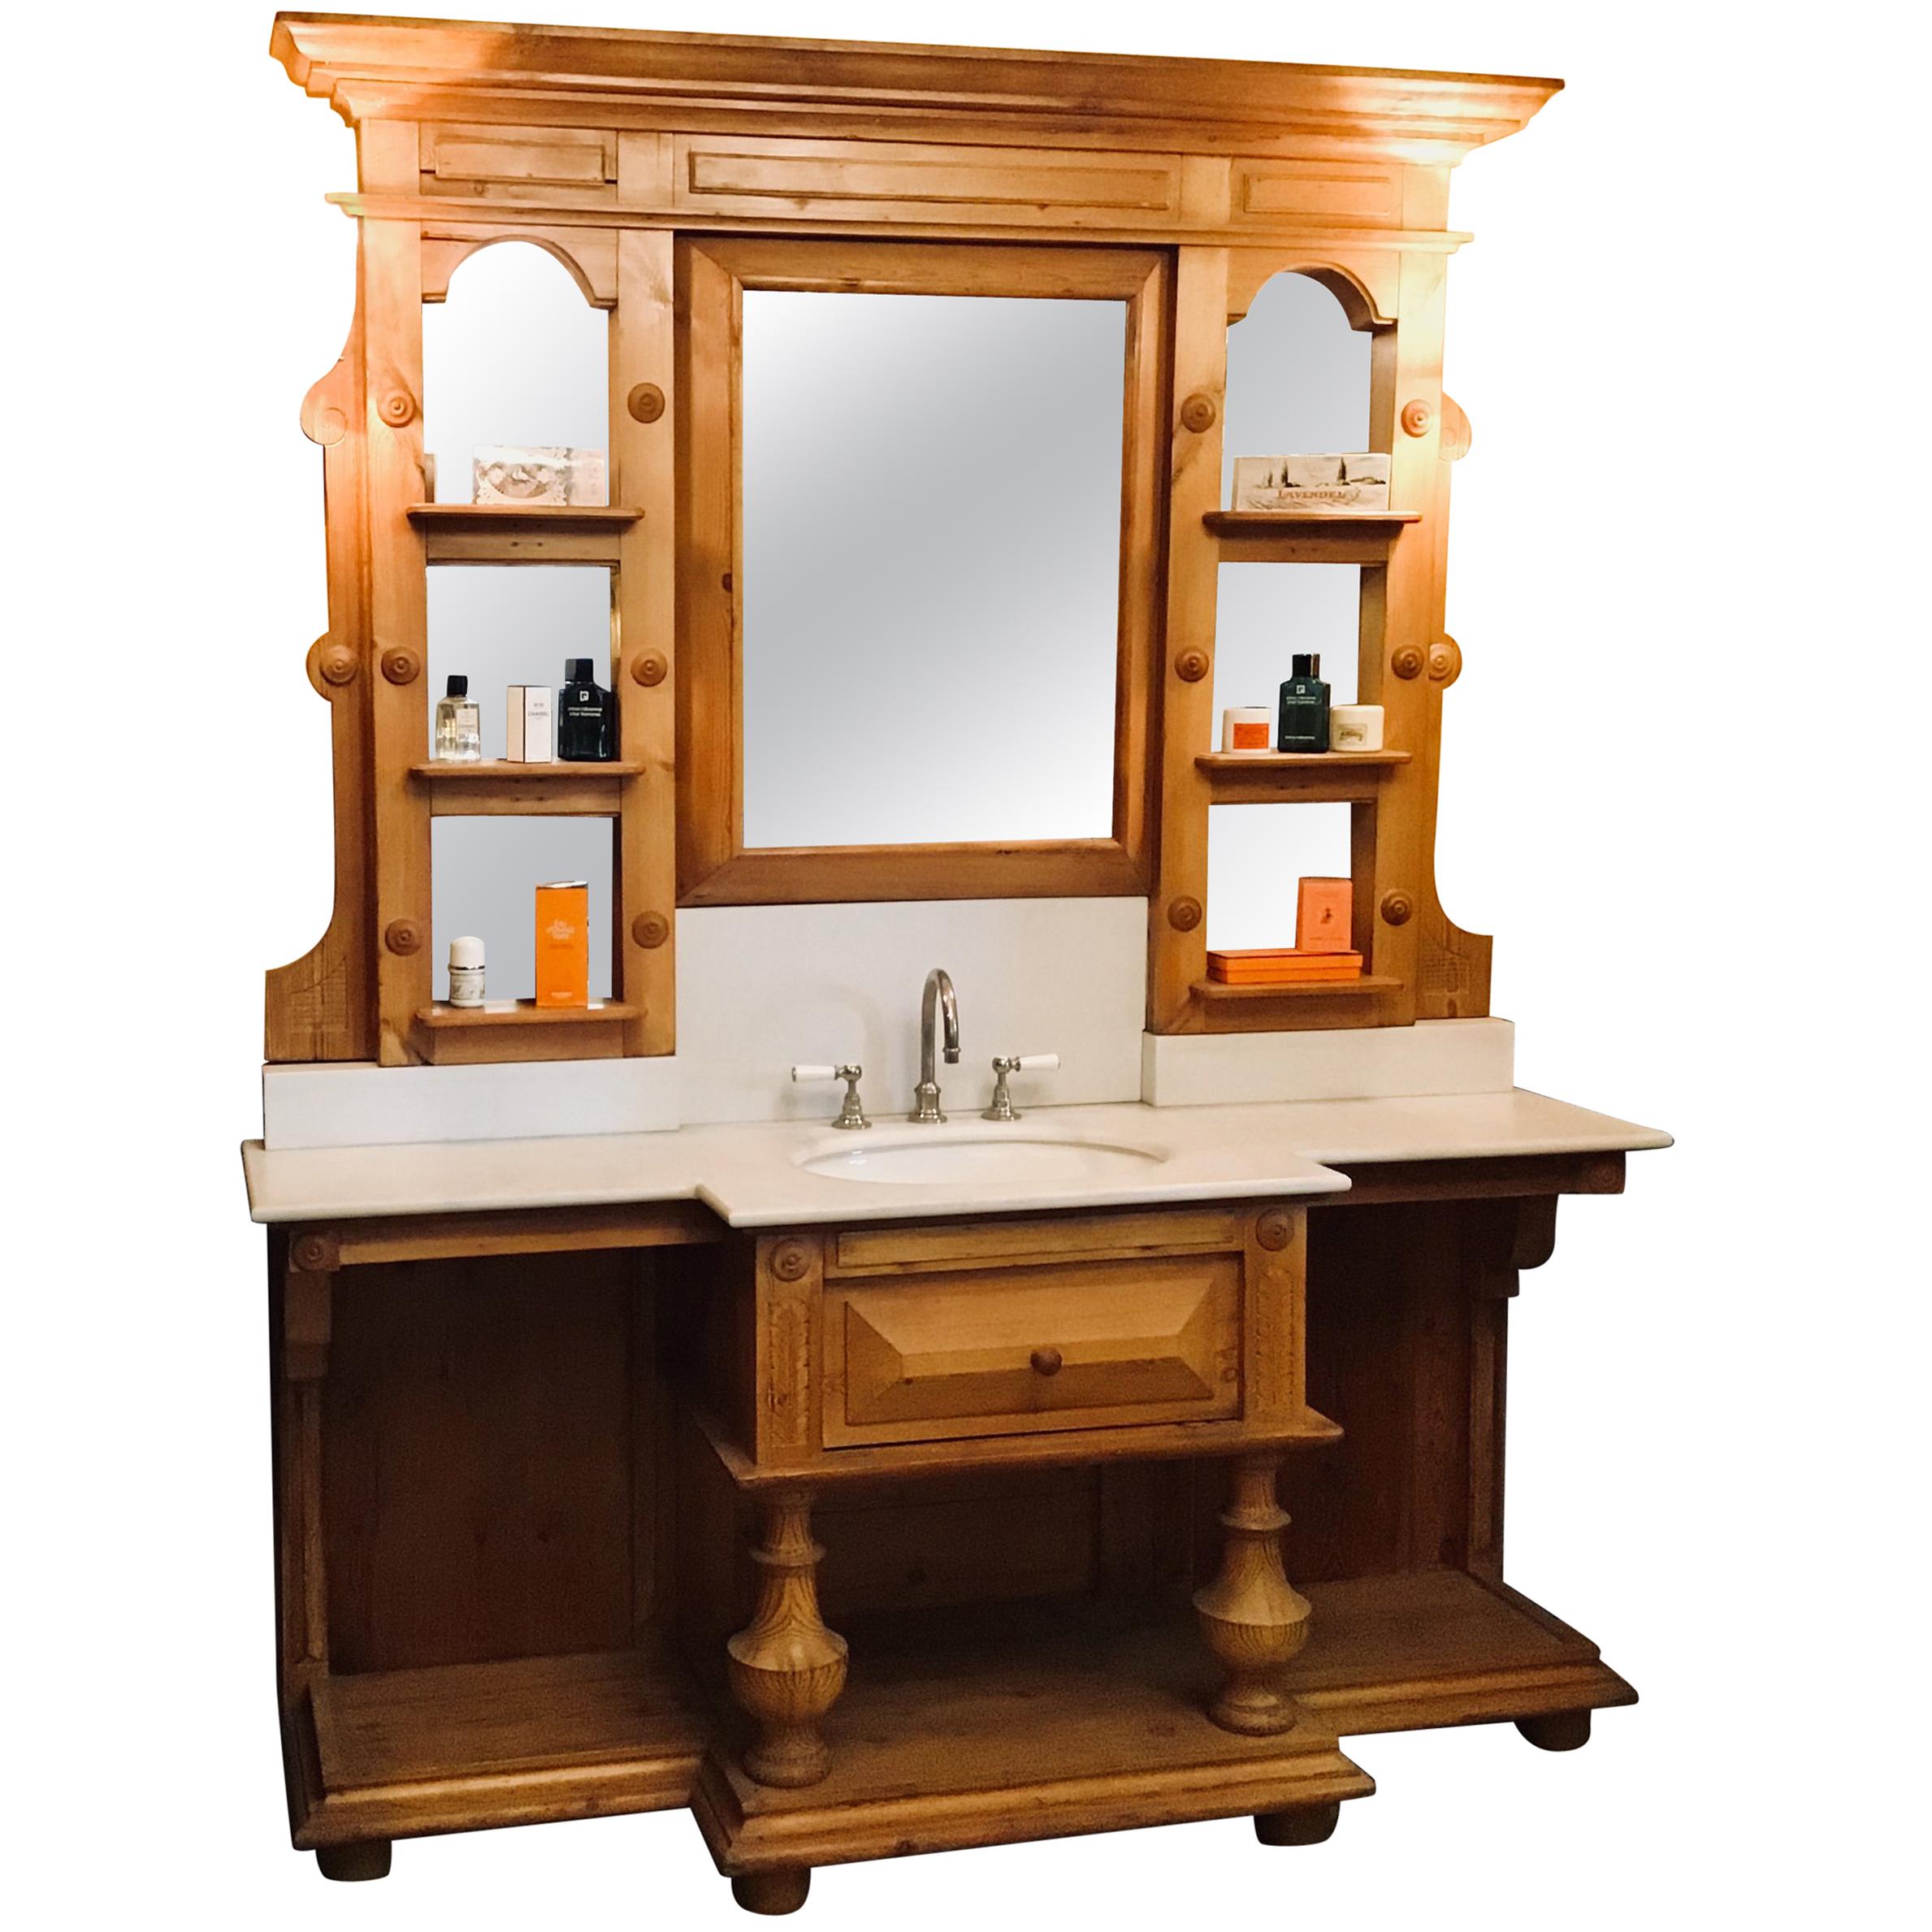 French Sink in Spruce with Marble Top Equipped with Mirrors and Shelves, 1890s